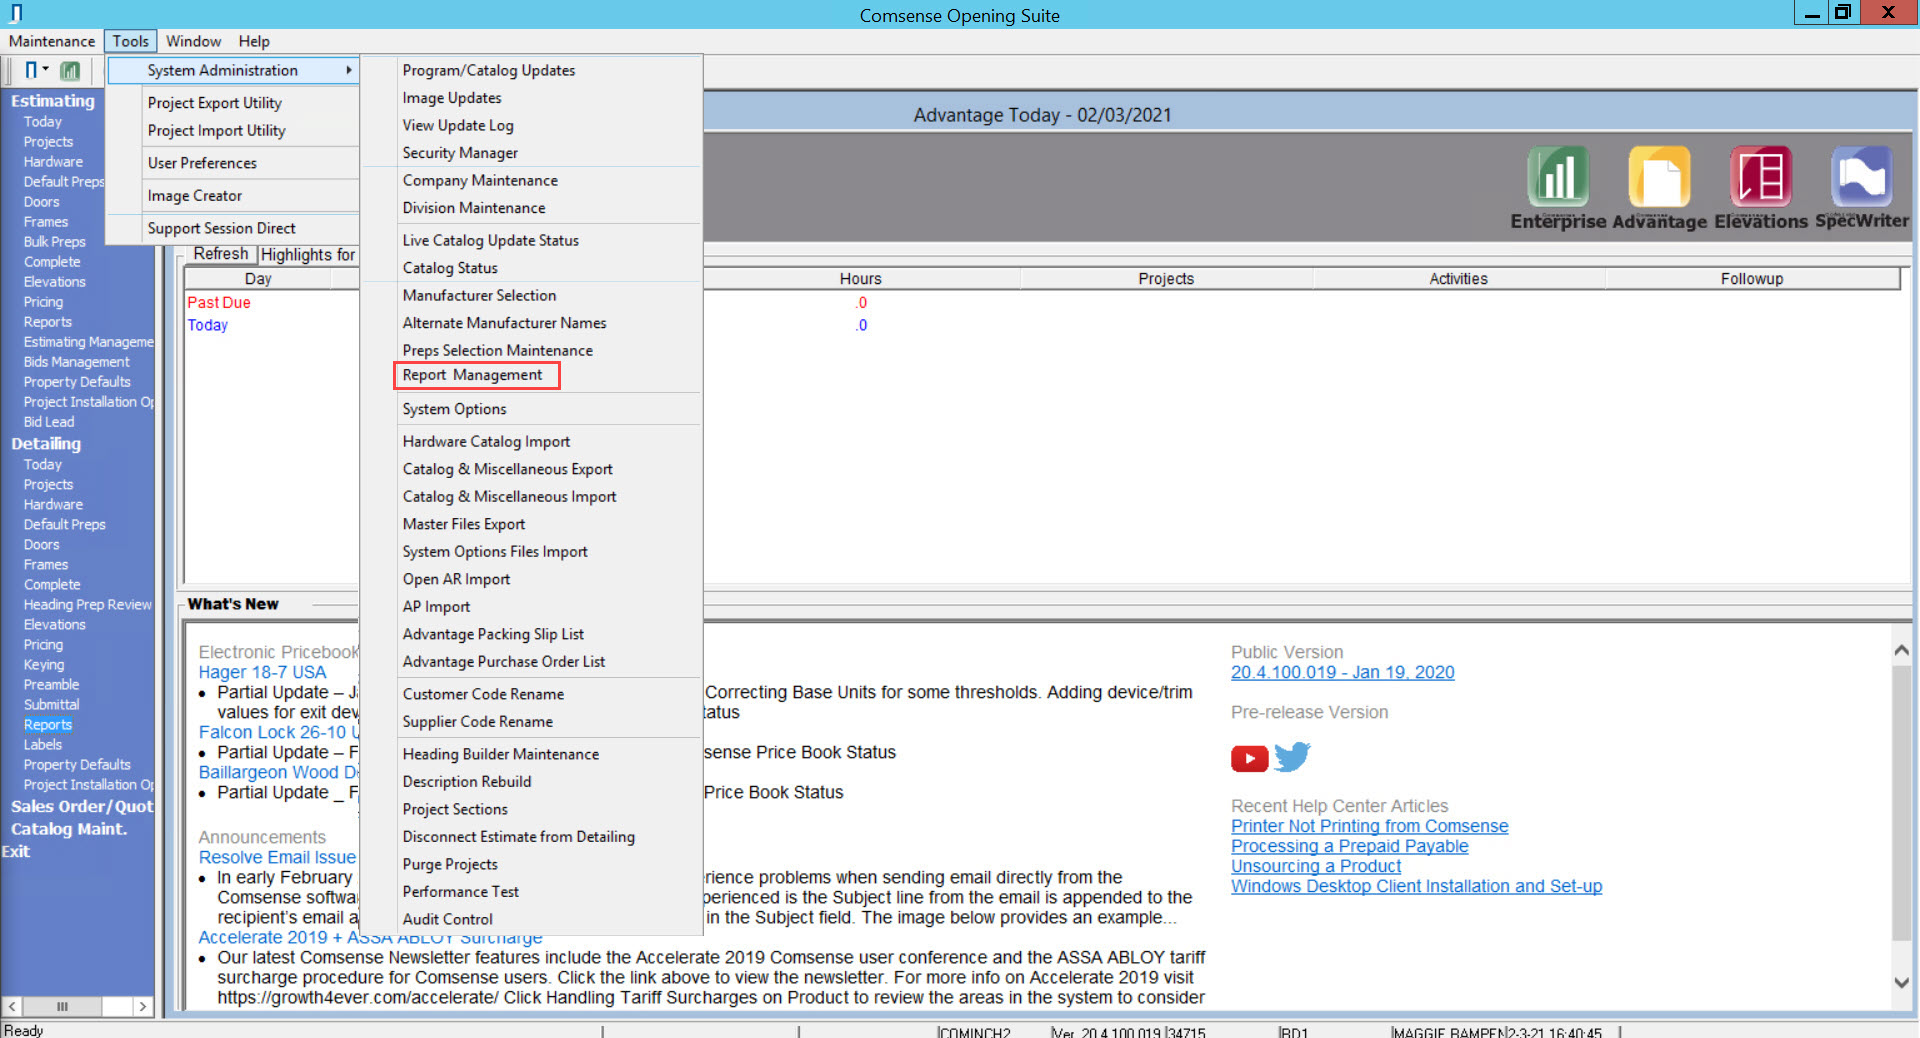 Comsense Advantage; shows the pathway from the top tool bar to Advantage Reports.